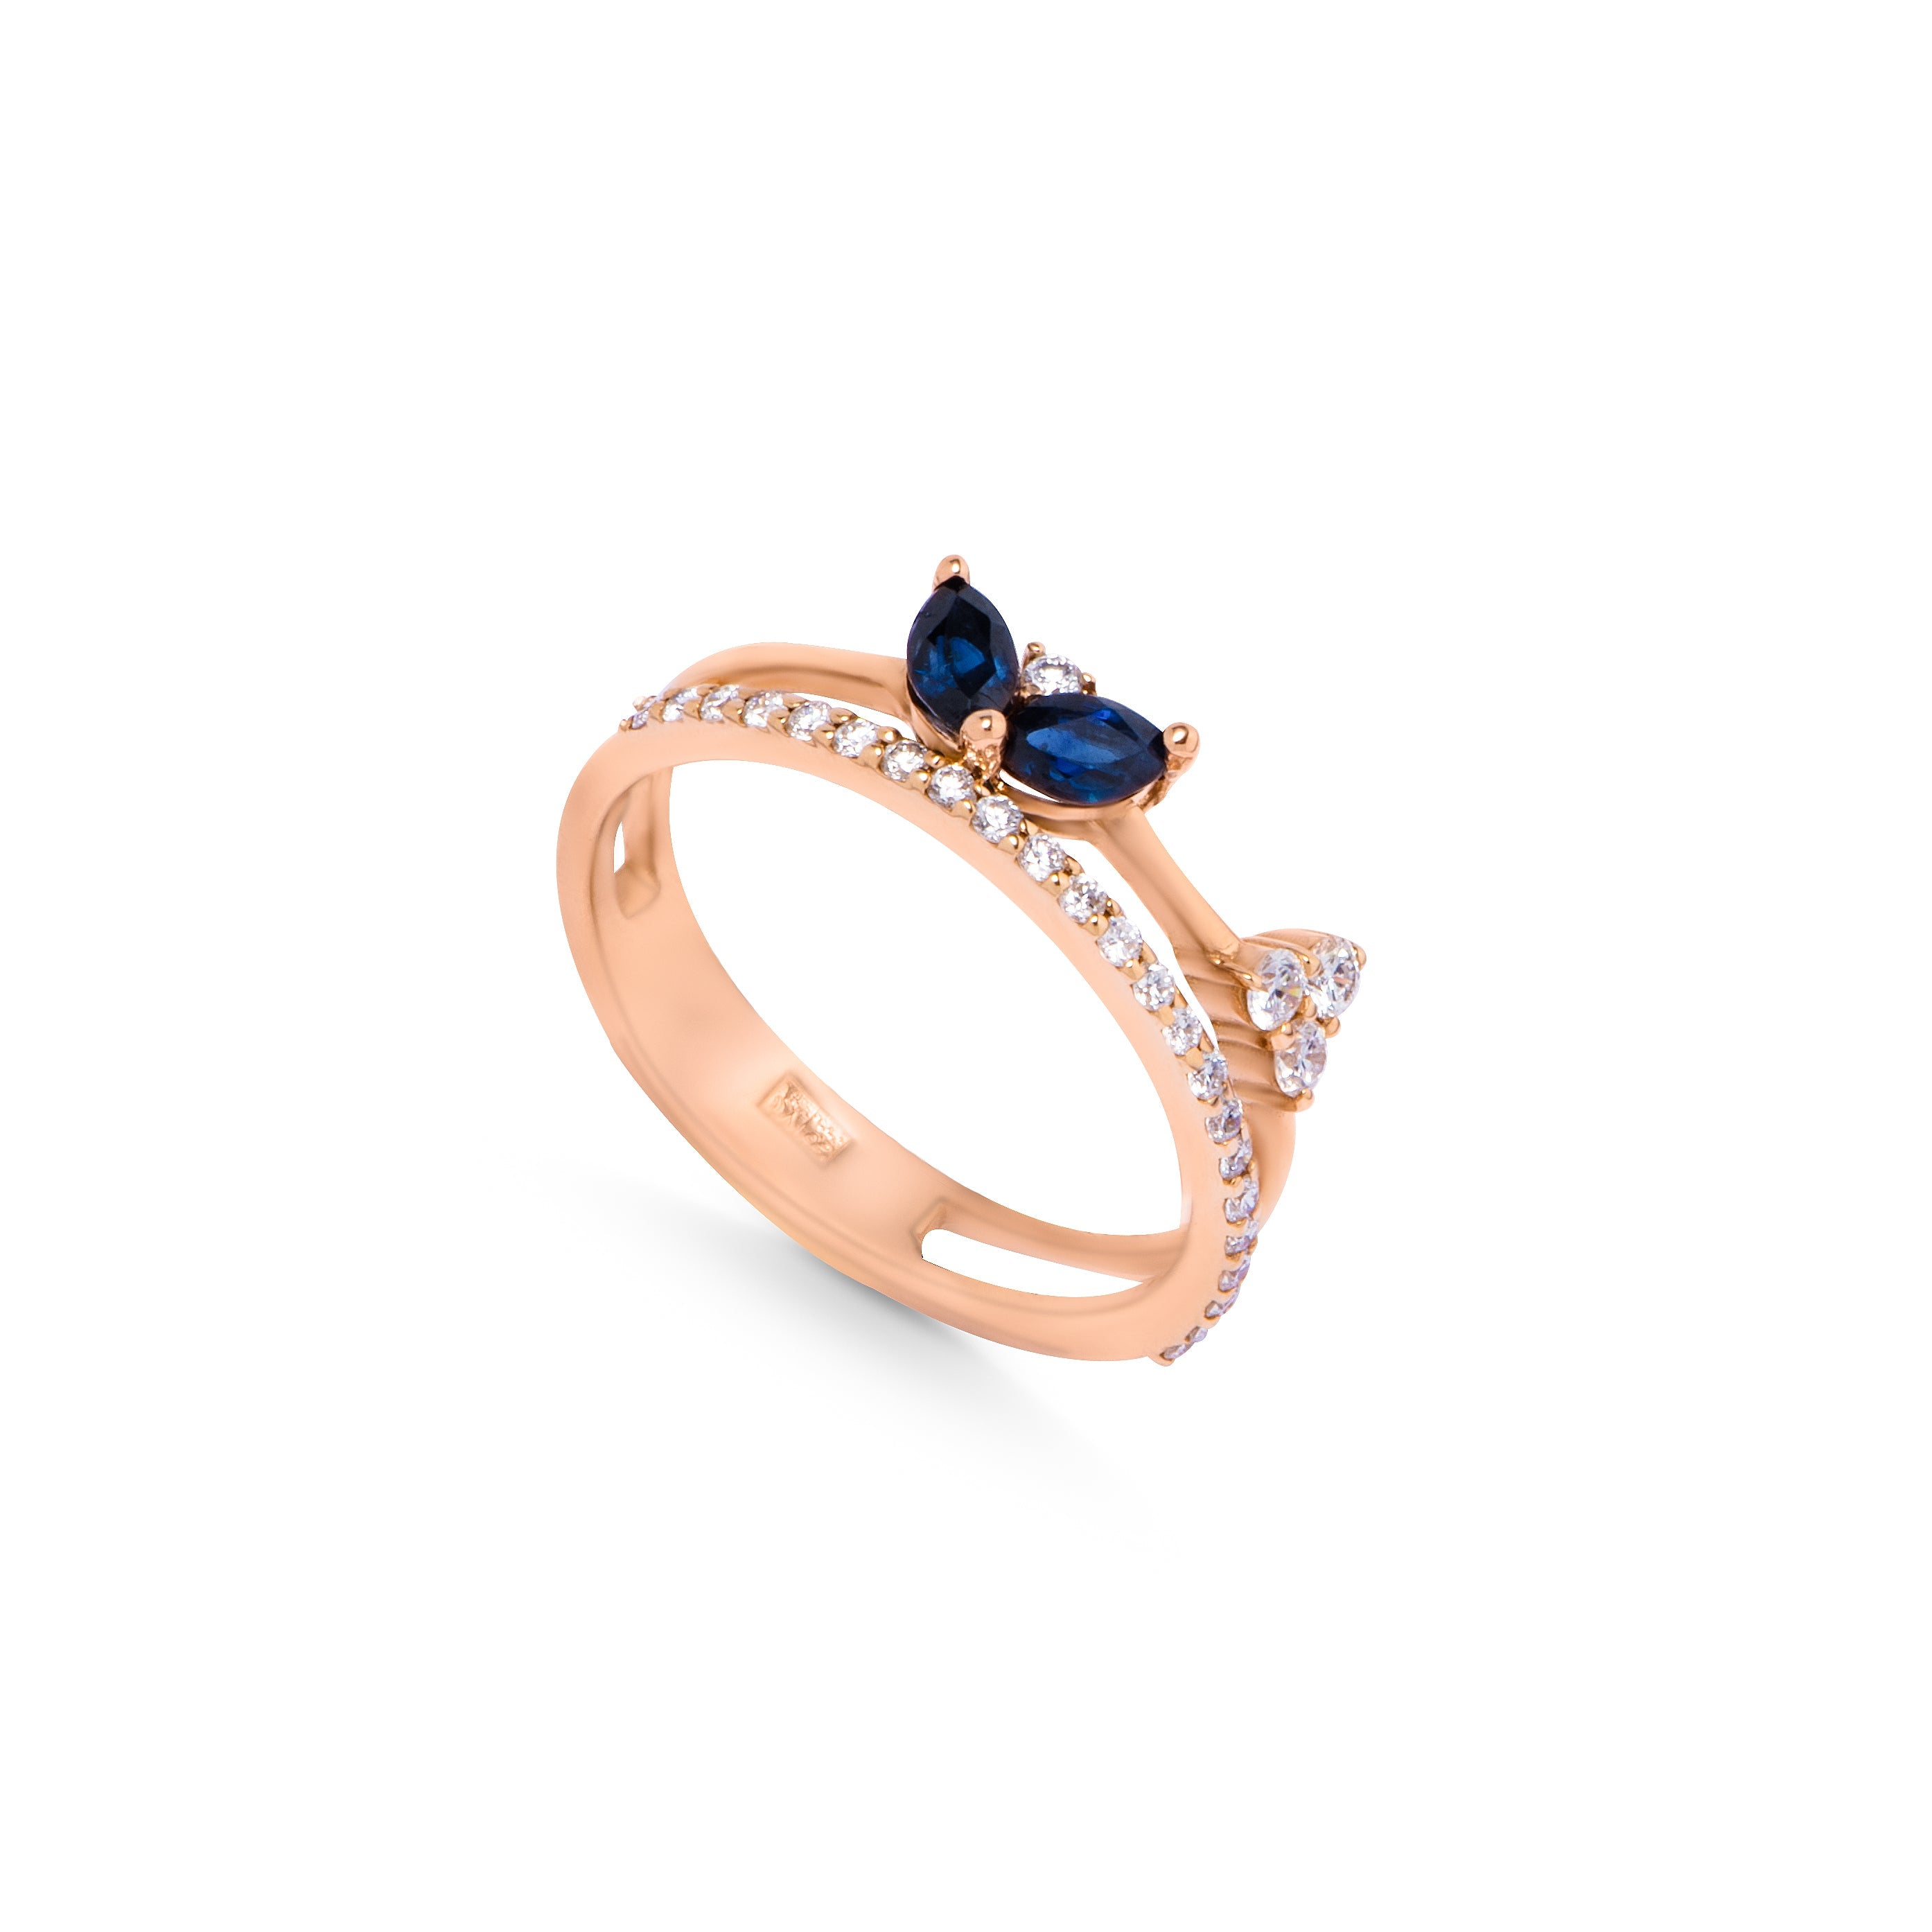 Double layer Diamond Ring with sapphire stones in 18k Rose Gold - S-R92